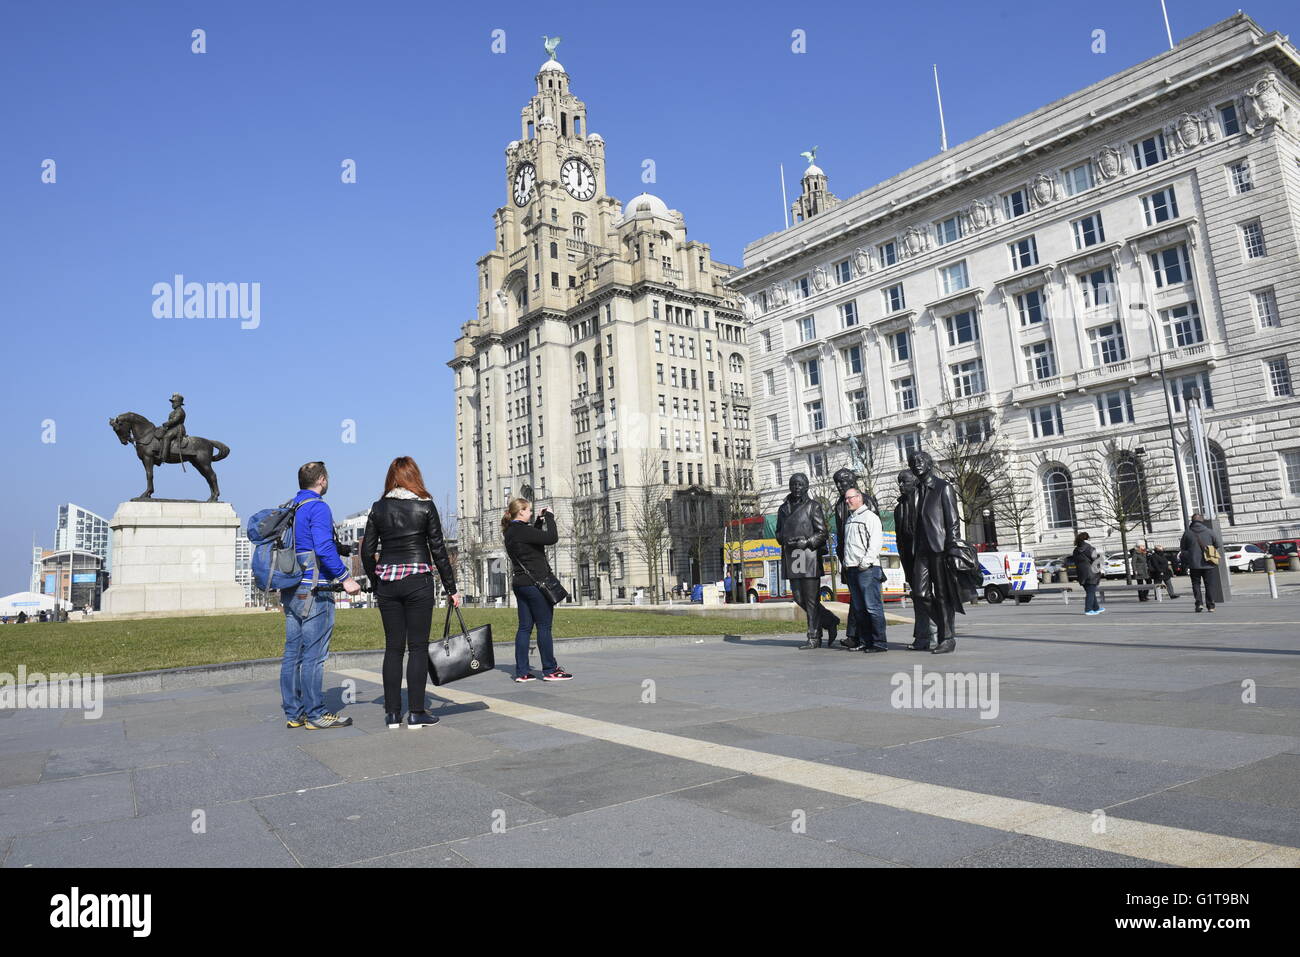 Beatles fans pose for photographs with statue at Pierhead, Liverpool, UK Stock Photo